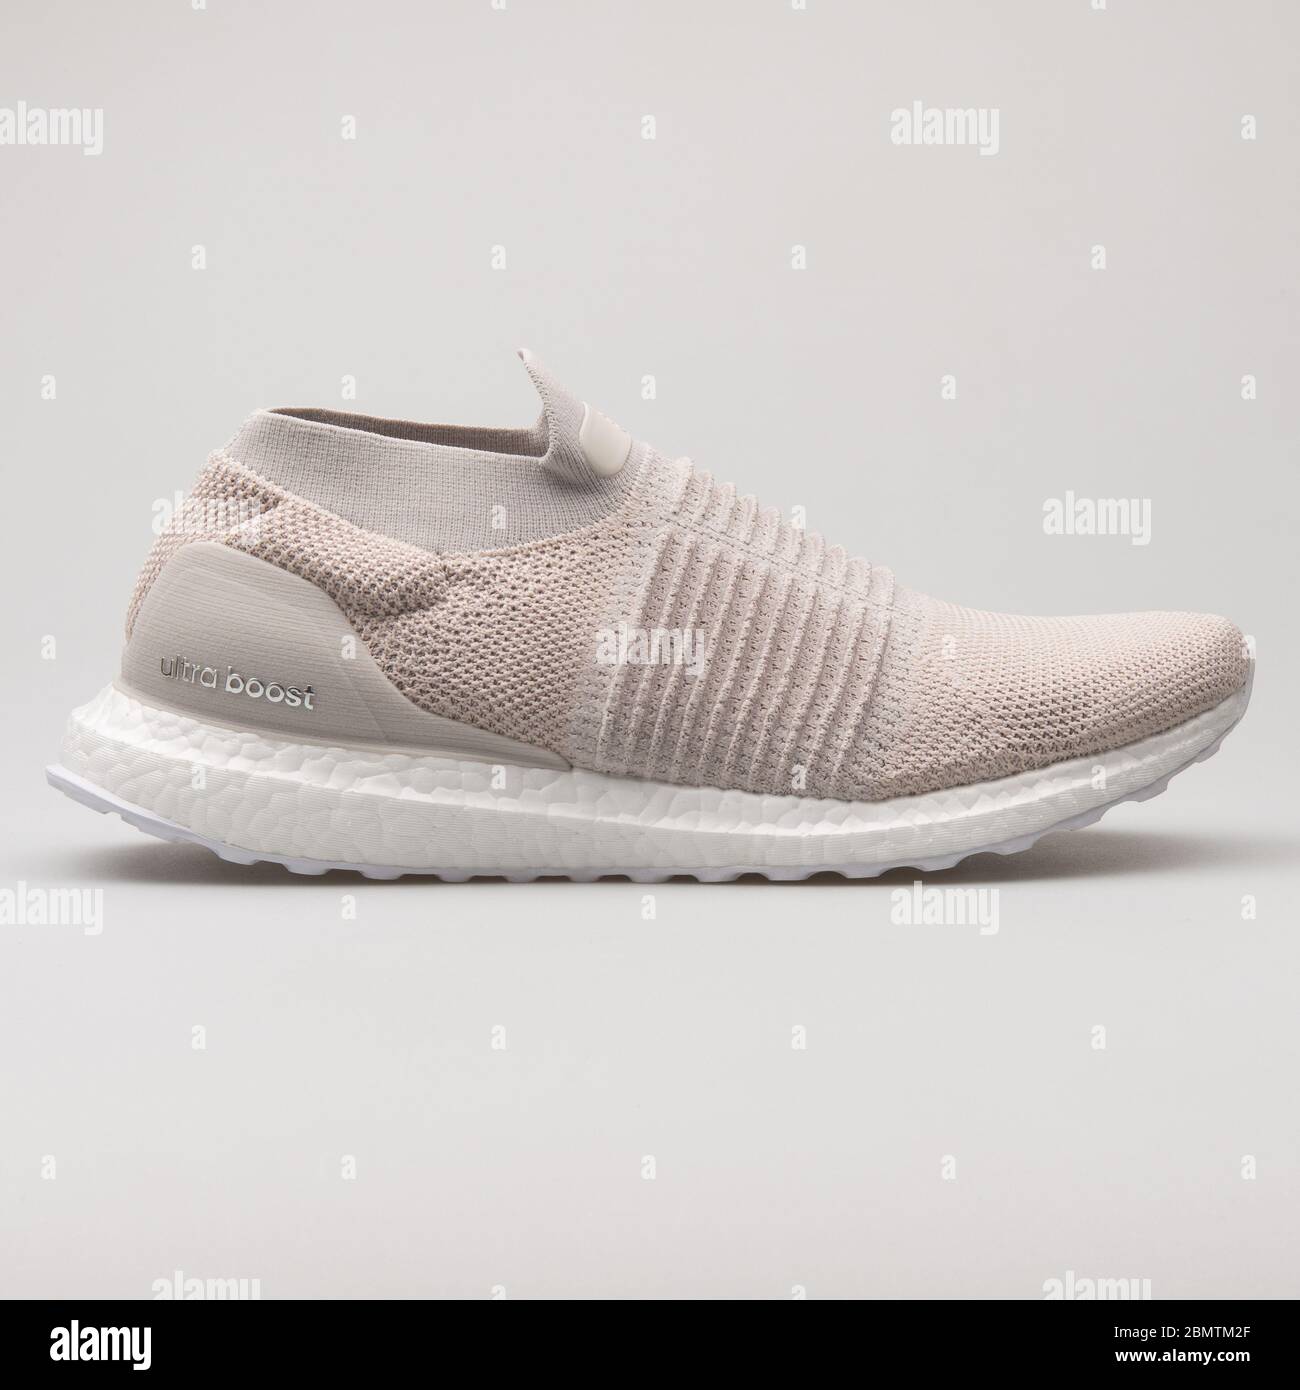 adidas ultra boost august 2018,OFF 66%,goldenlinetaxiswarwick.co.uk